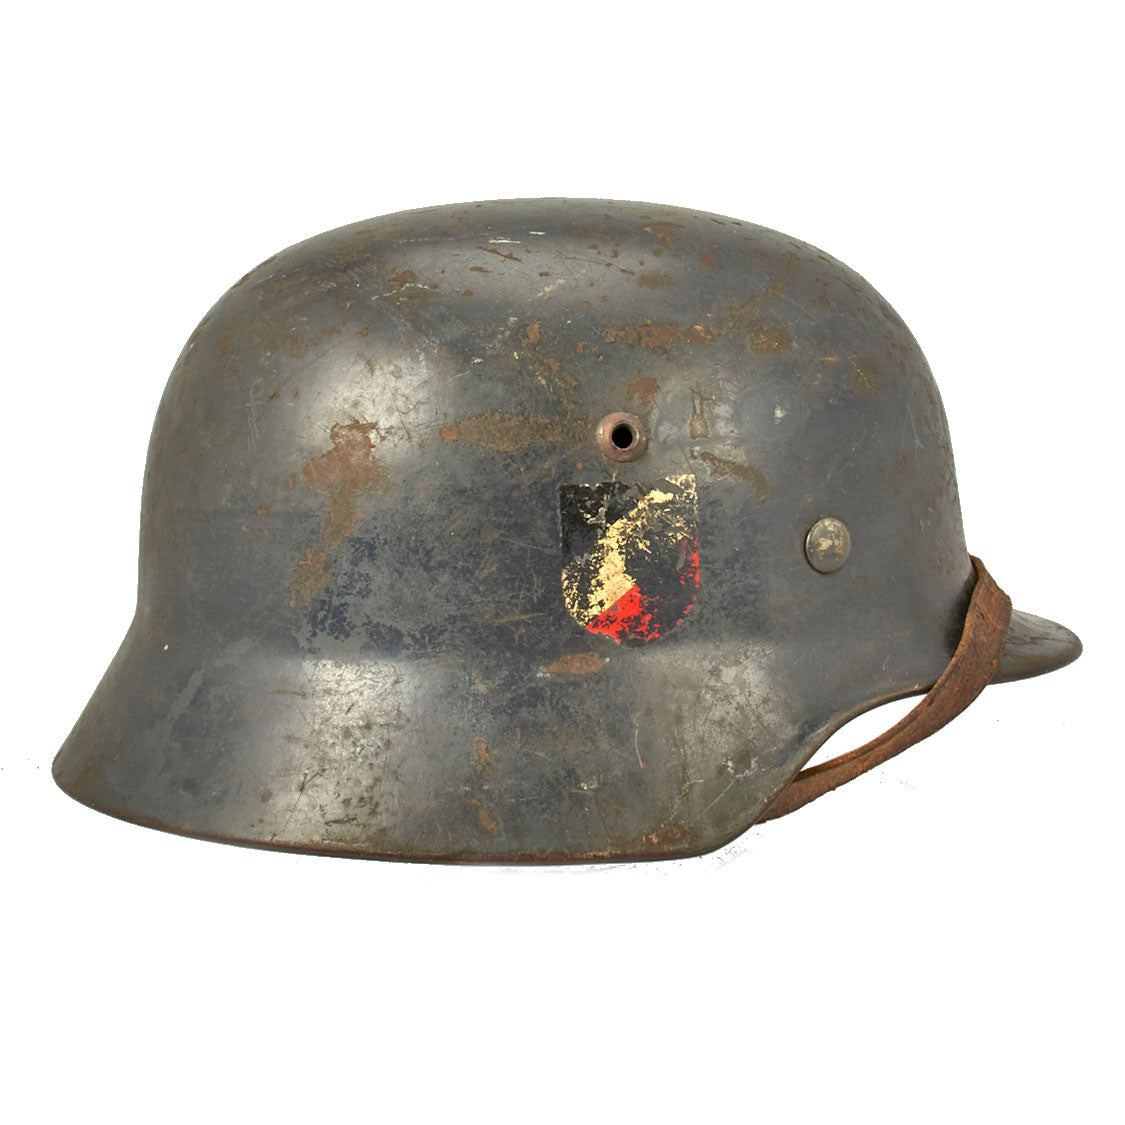 Original German WWII Luftwaffe M35 Double Decal Helmet with Size 